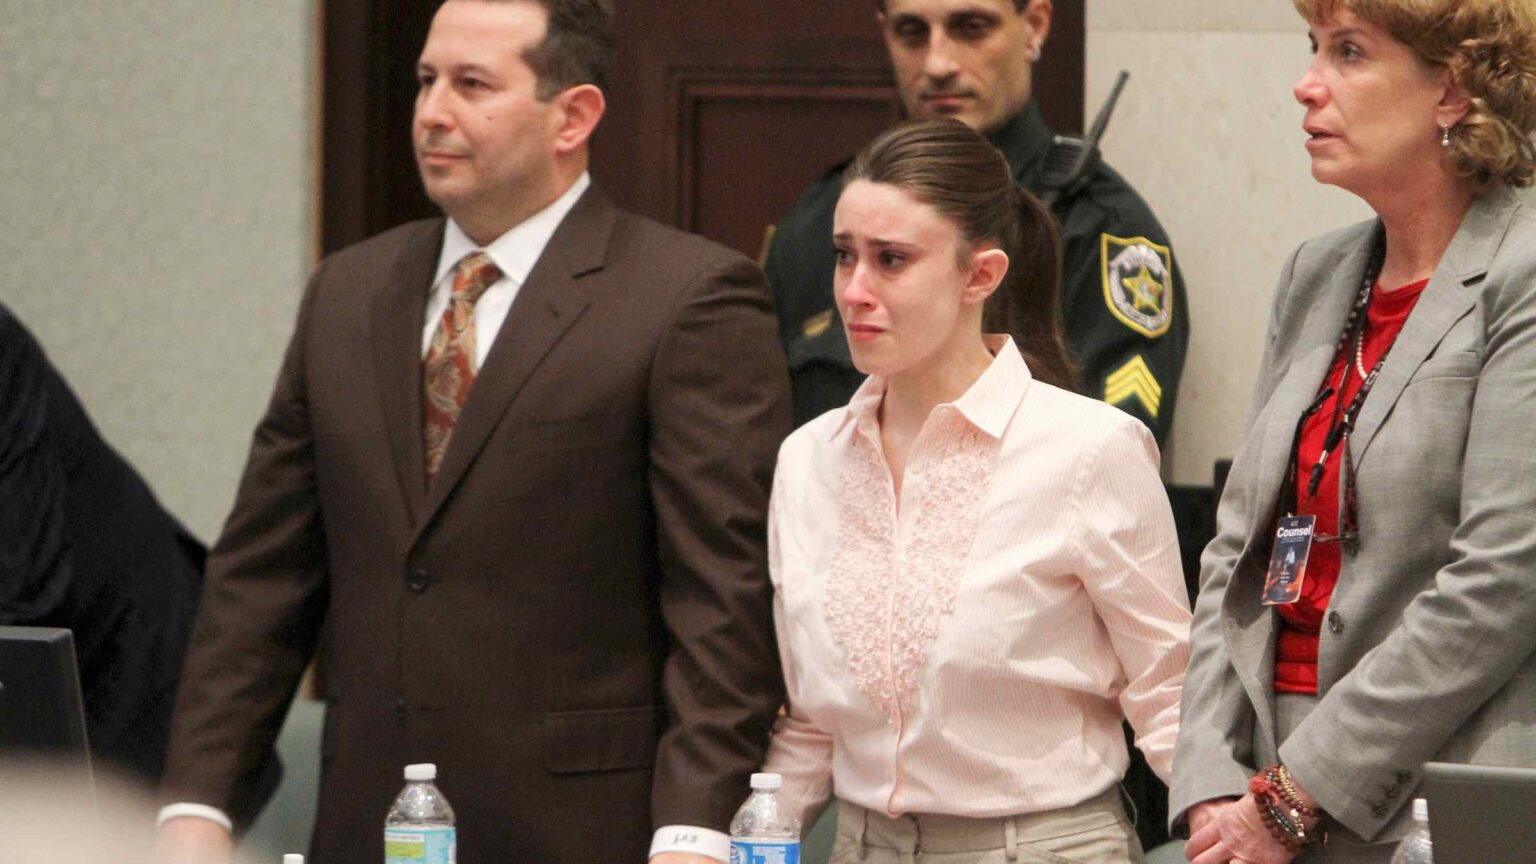 Remember Casey Anthony? The woman at the center of a media hellscape around the premature death of her toddler? Here's an update on Anthony now.